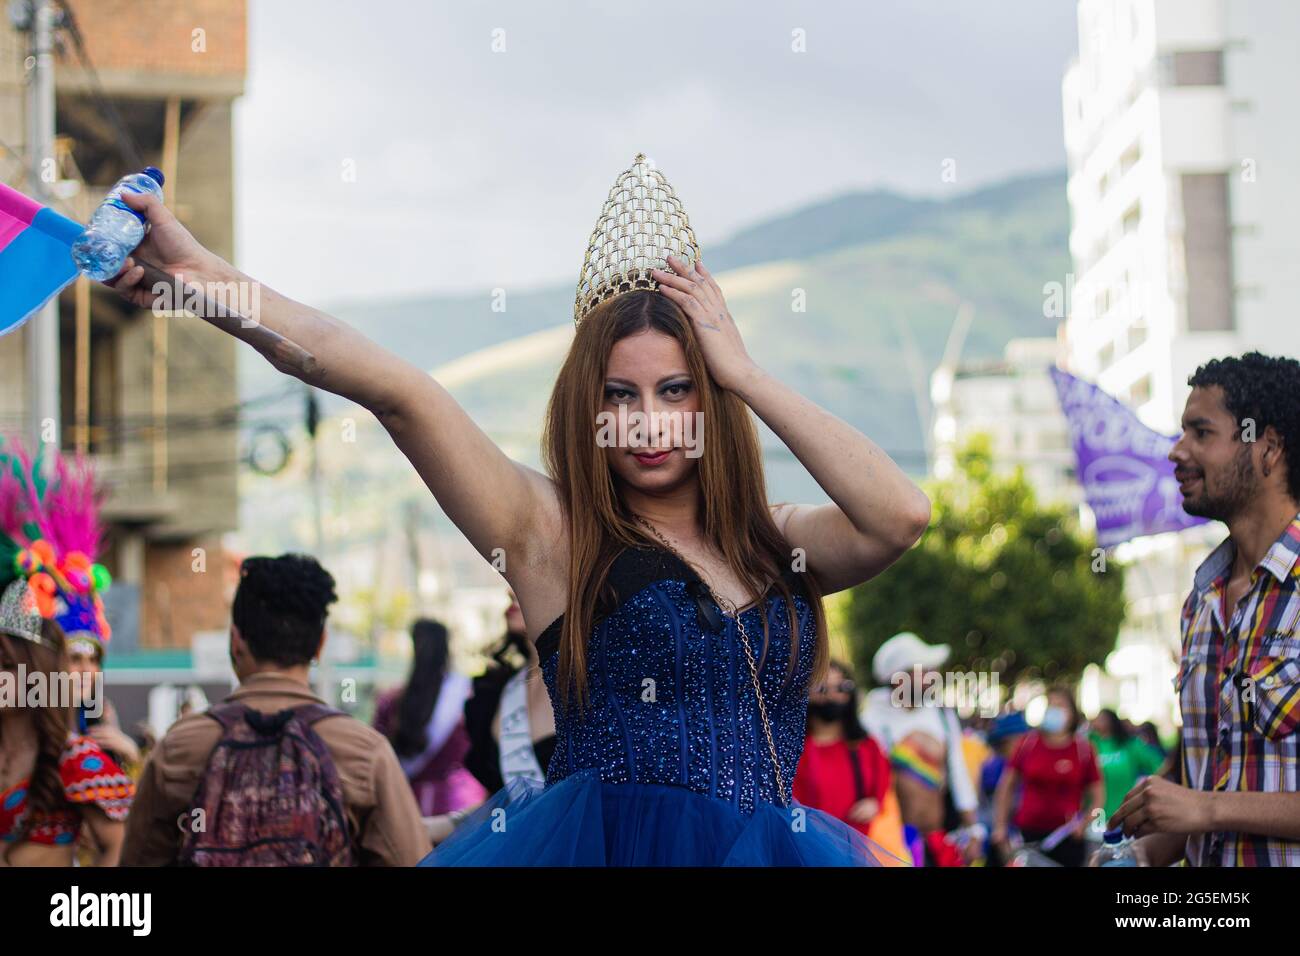 A trans women poses for a photo dressed as a beauty contest queen during the annual celebreation of the Pride Parade in demand of LGTBQ rights in Colombia in Pasto, Narino - Colombia on June 25, 2021. Stock Photo